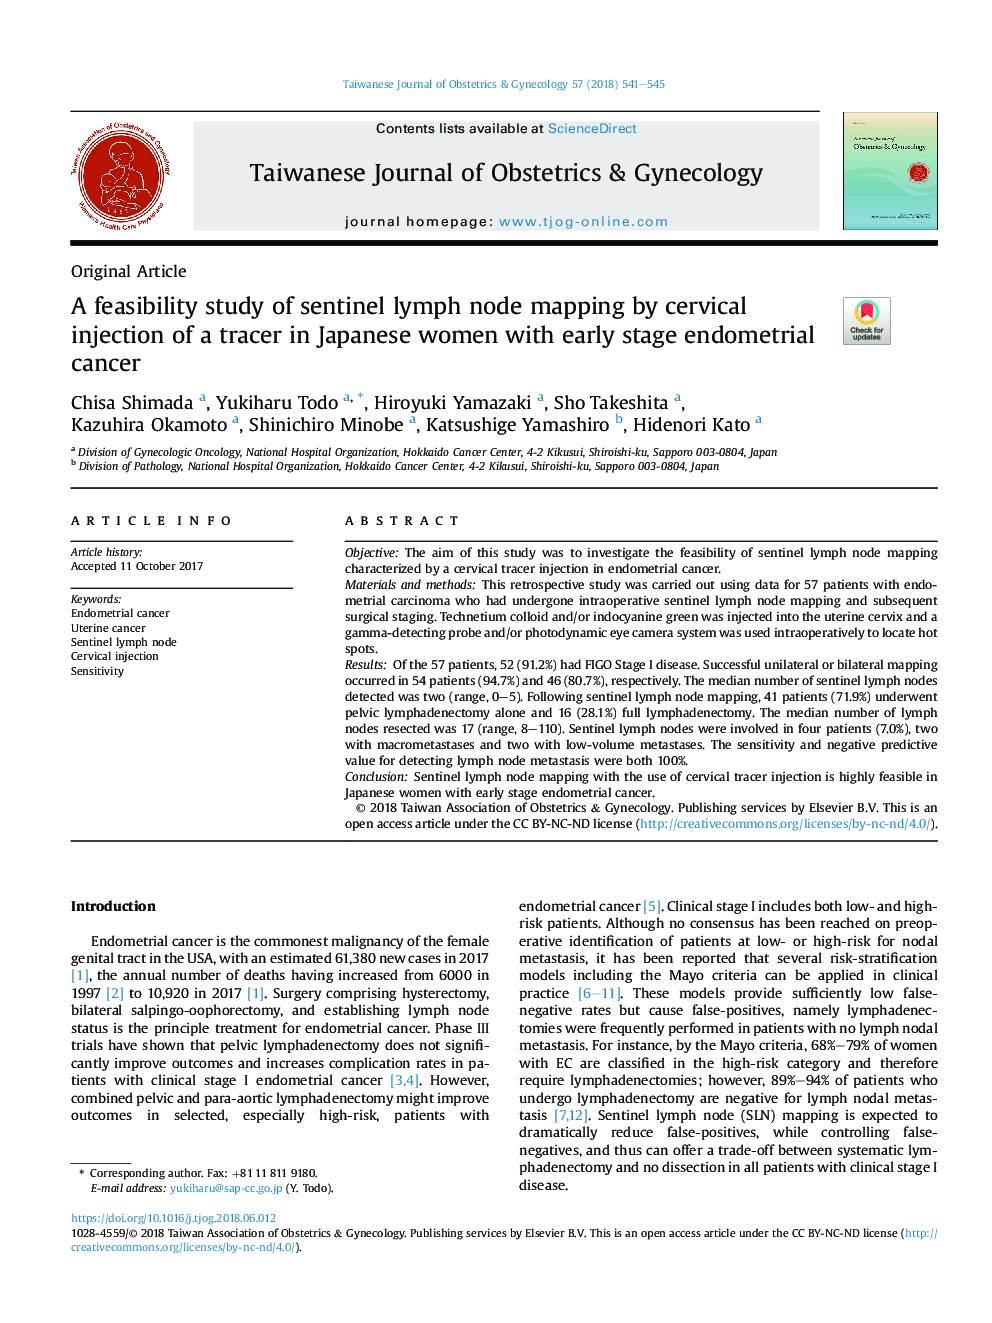 A feasibility study of sentinel lymph node mapping by cervical injection of a tracer in Japanese women with early stage endometrial cancer